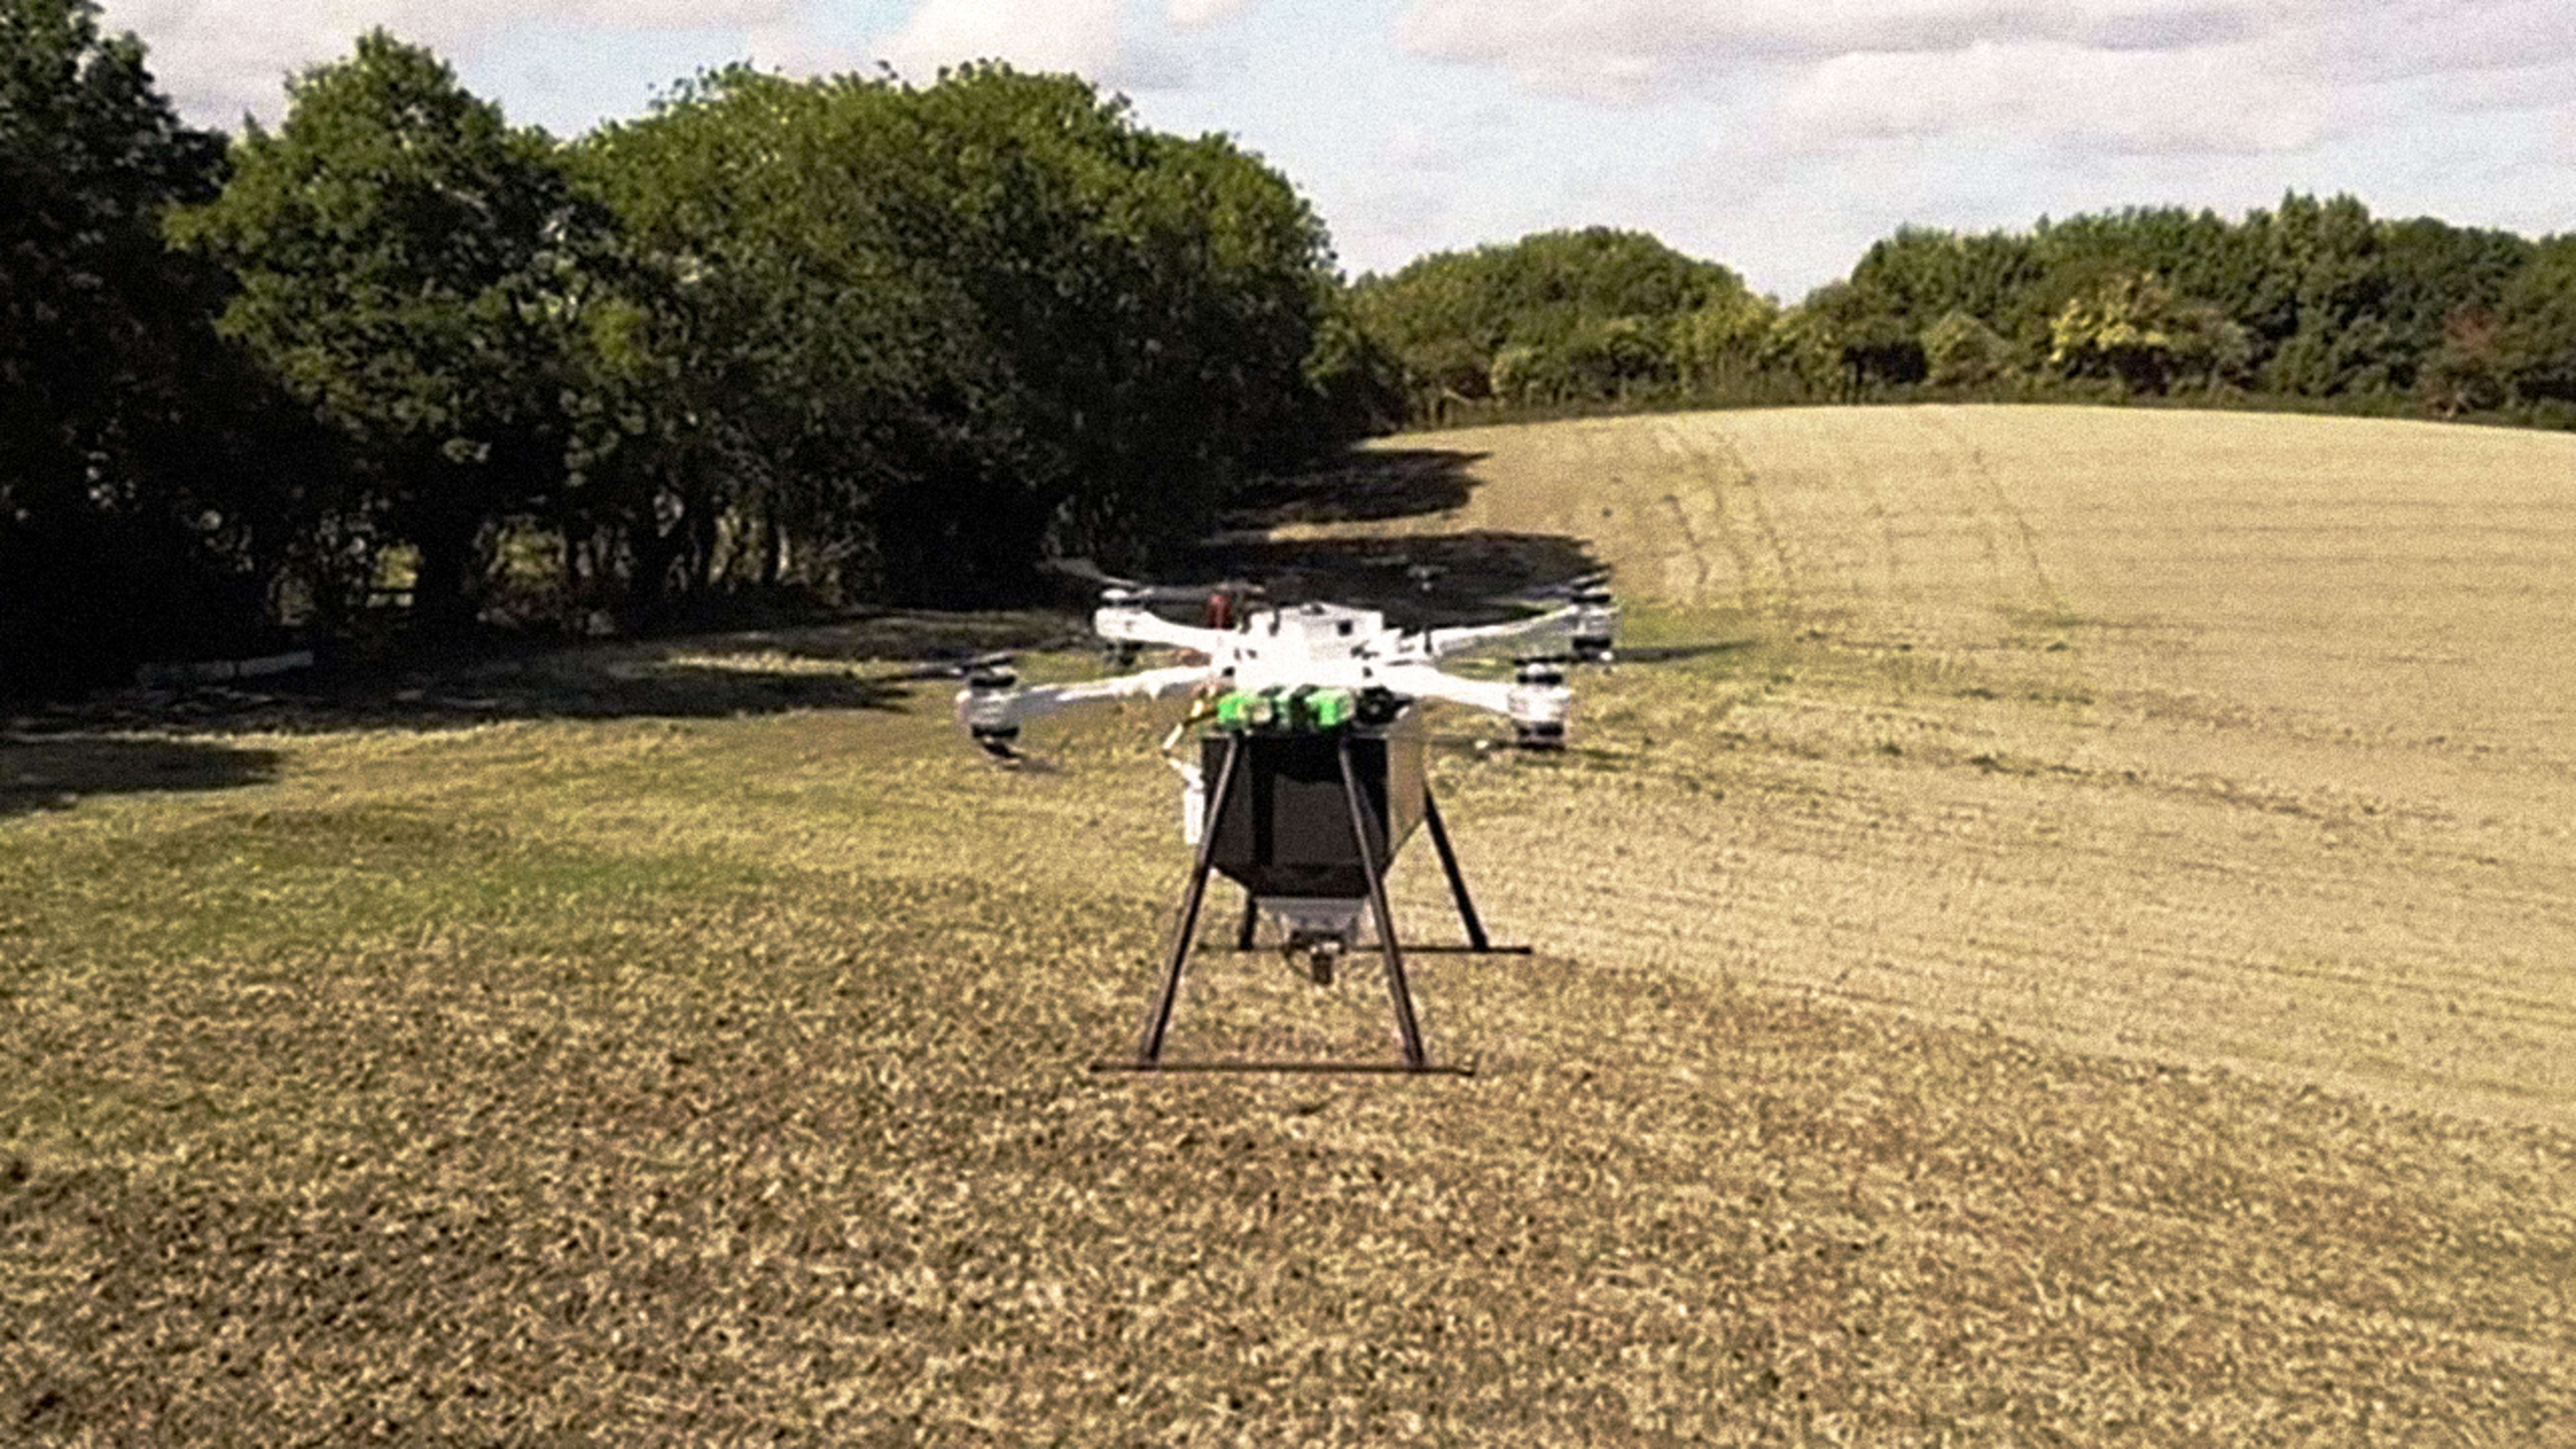 These tree-planting drones are firing seed missiles to restore the world’s forests